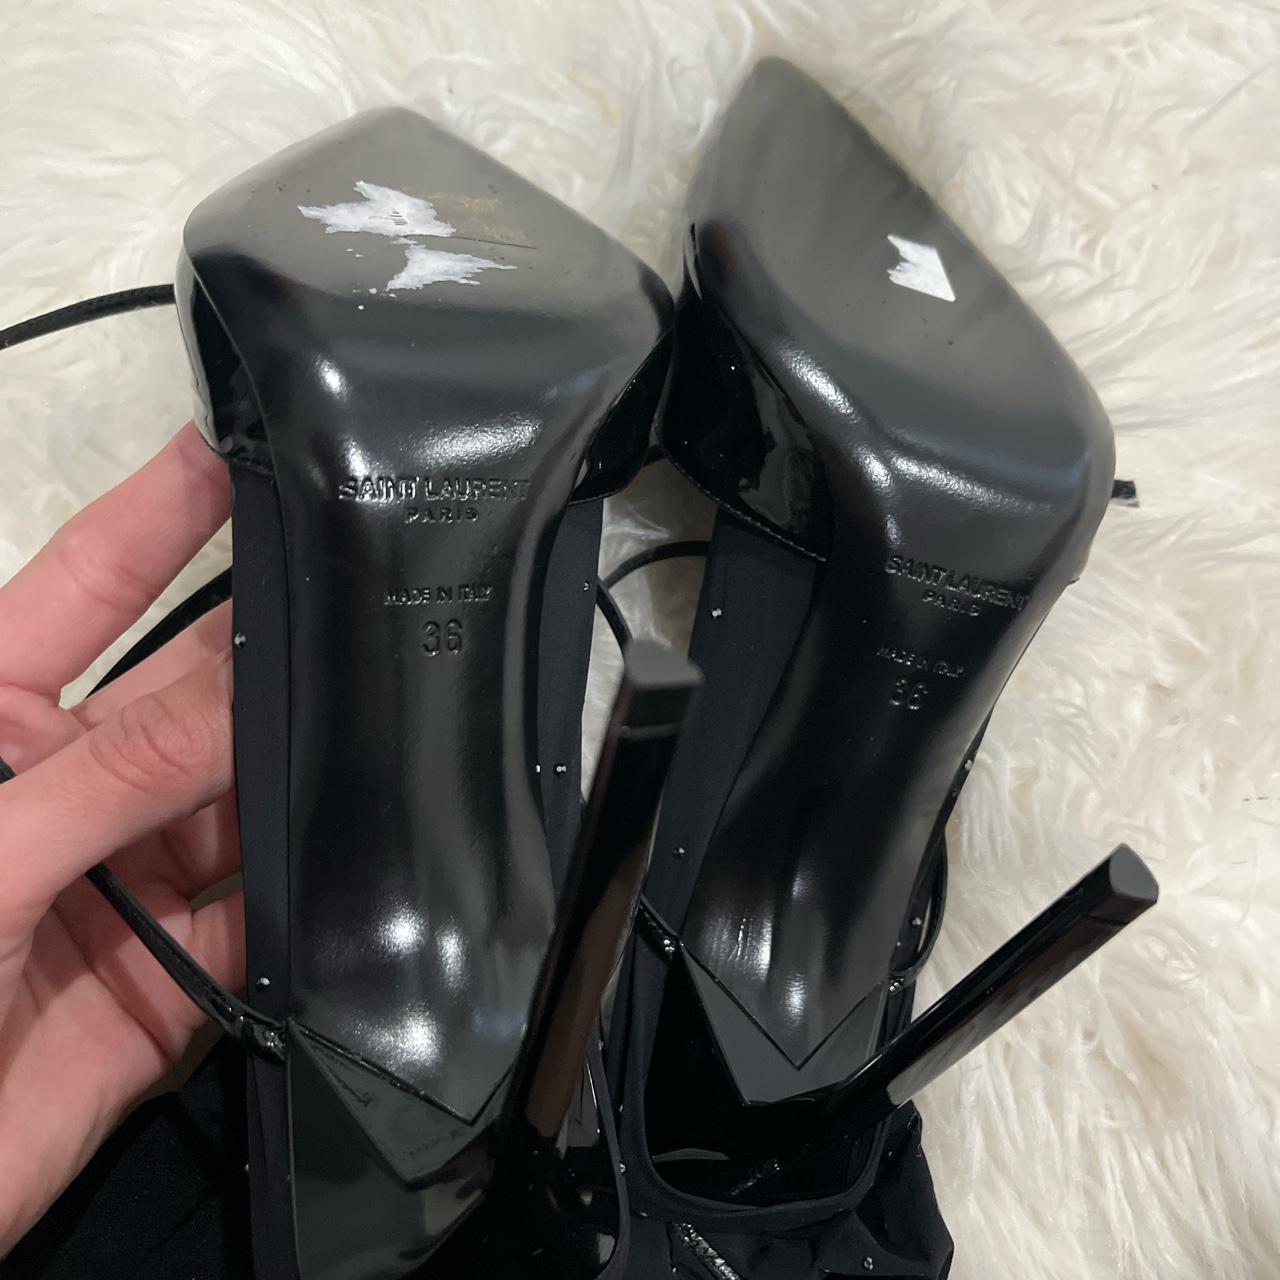 YSL shoes real vs fake. How to spot fake Saint Laurent opyum heels 